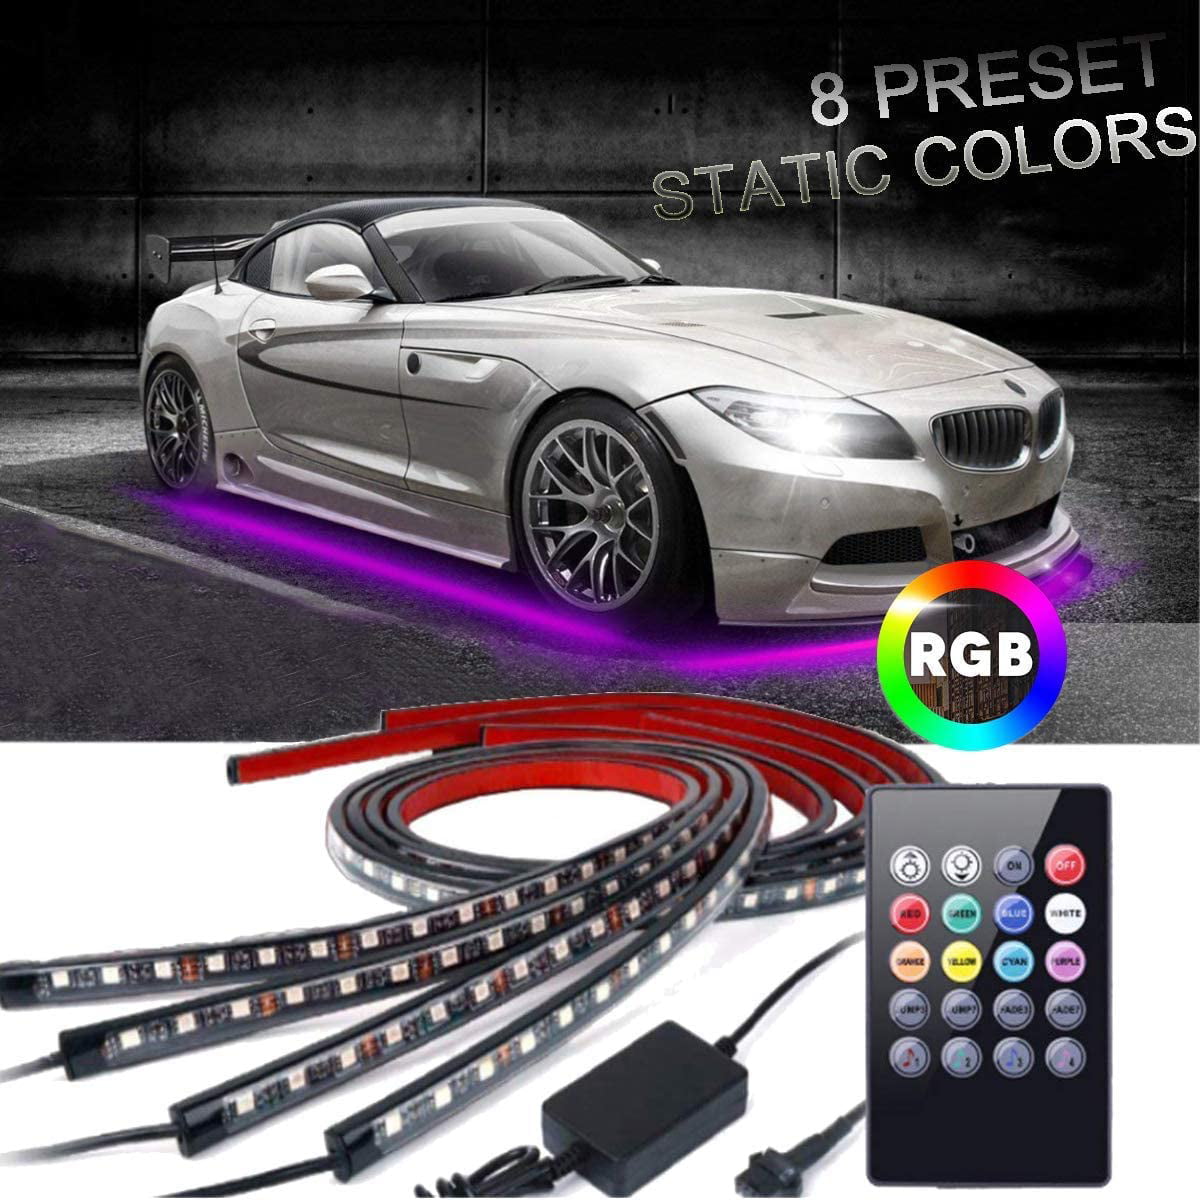 Car Underglow Lights Under Car Led Lights 16 Million Colors Neon Accent Lights Kit,Car Led Strip Lights Sync to Music and App Control,Dc 12V 